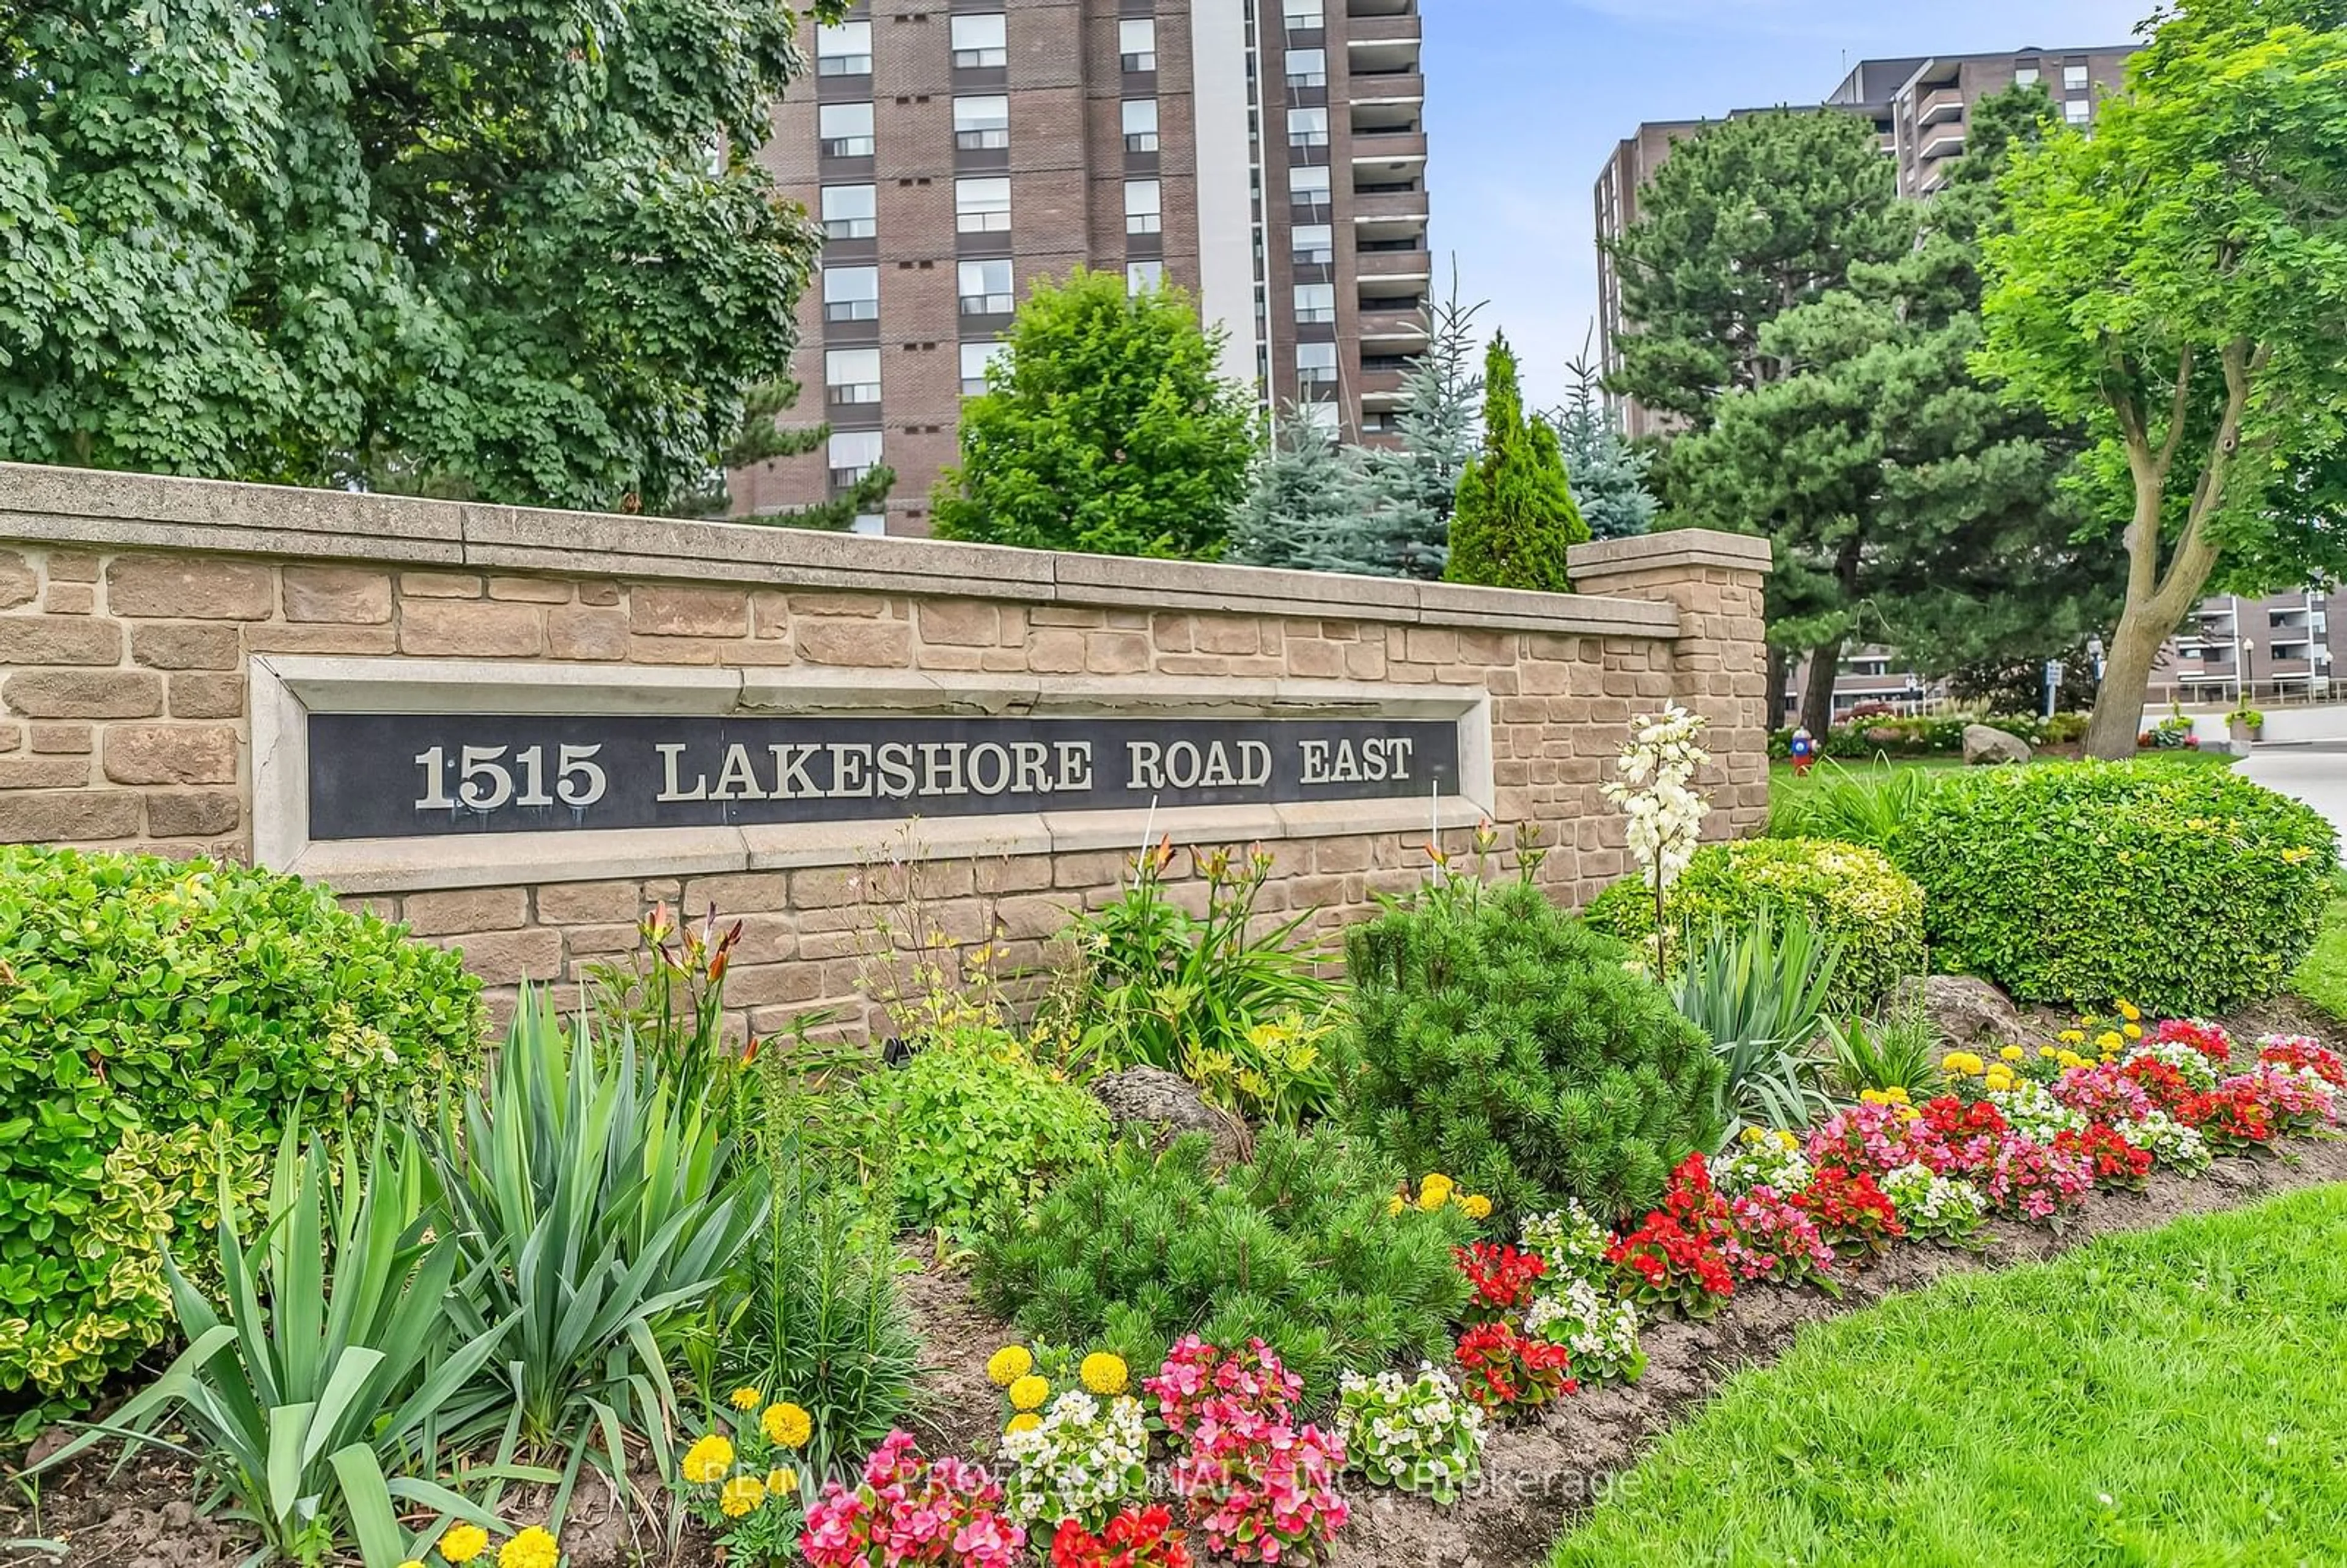 Lakeview for 1515 Lakeshore Rd #1405, Mississauga Ontario L5E 3E3